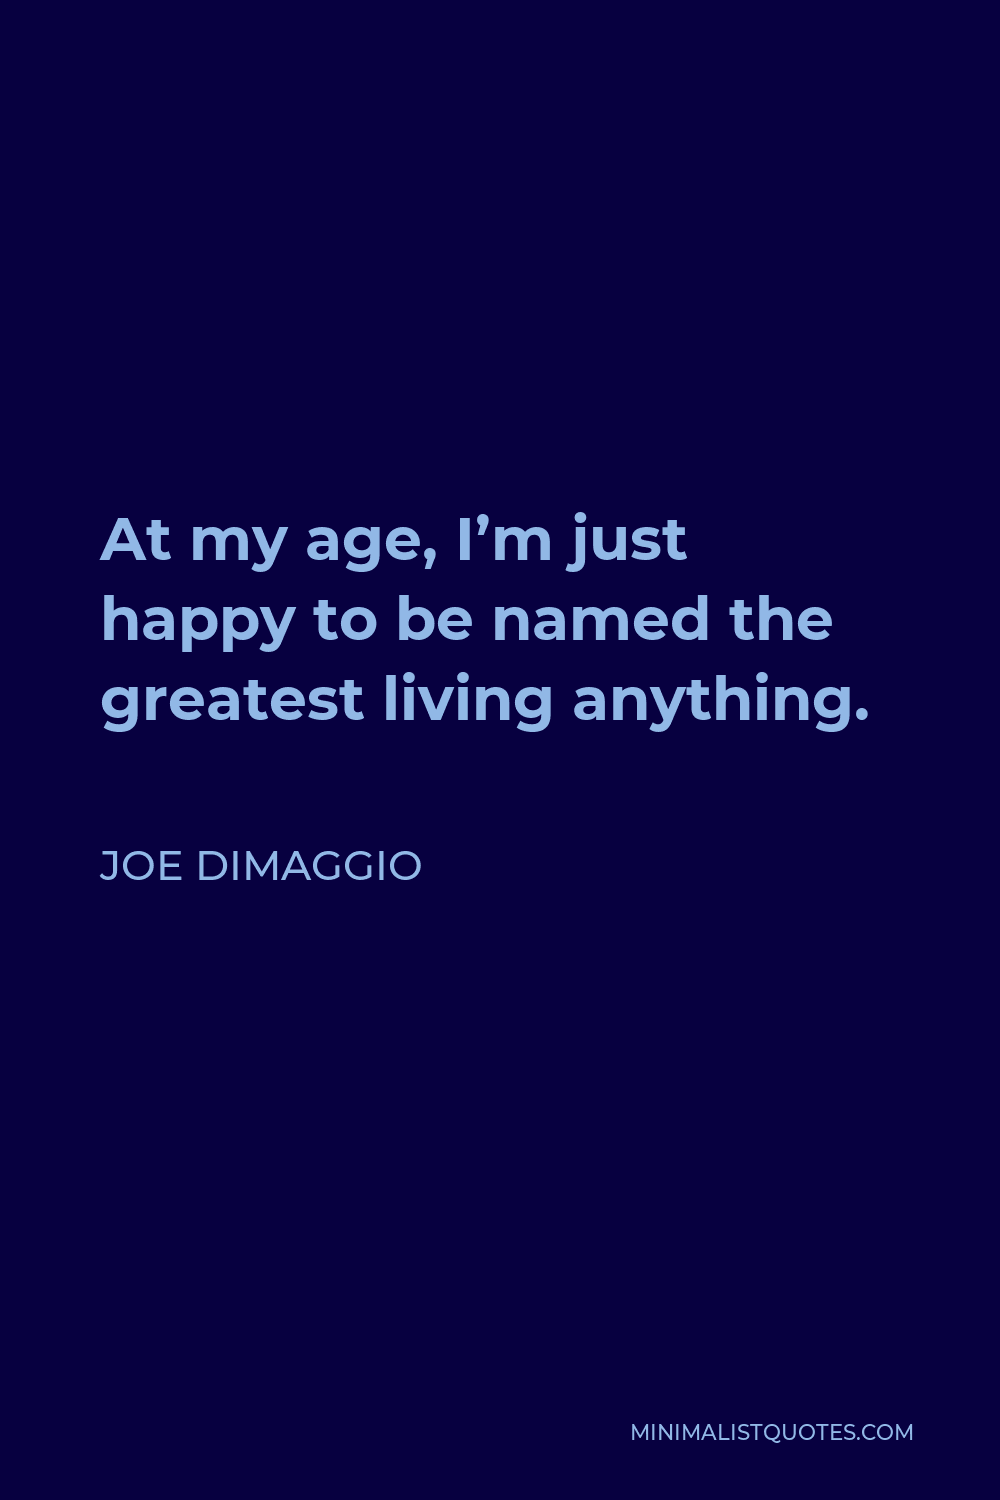 Joe DiMaggio Quote - At my age, I’m just happy to be named the greatest living anything.